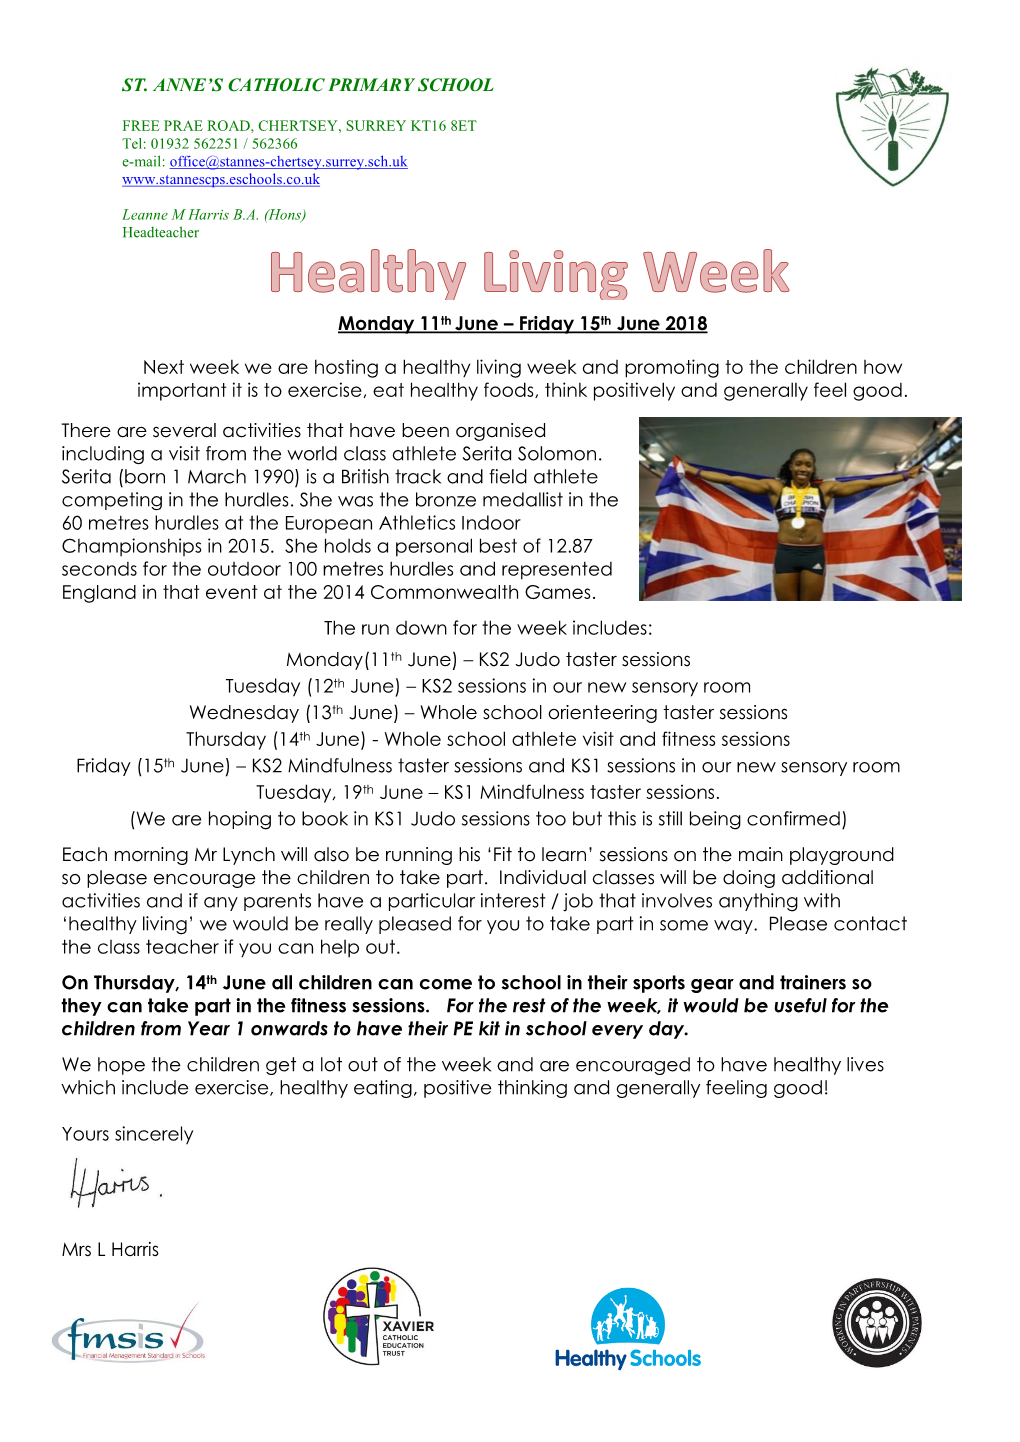 ST. ANNE's CATHOLIC PRIMARY SCHOOL Monday 11Th June – Friday 15Th June 2018 Next Week We Are Hosting a Healthy Living Week A